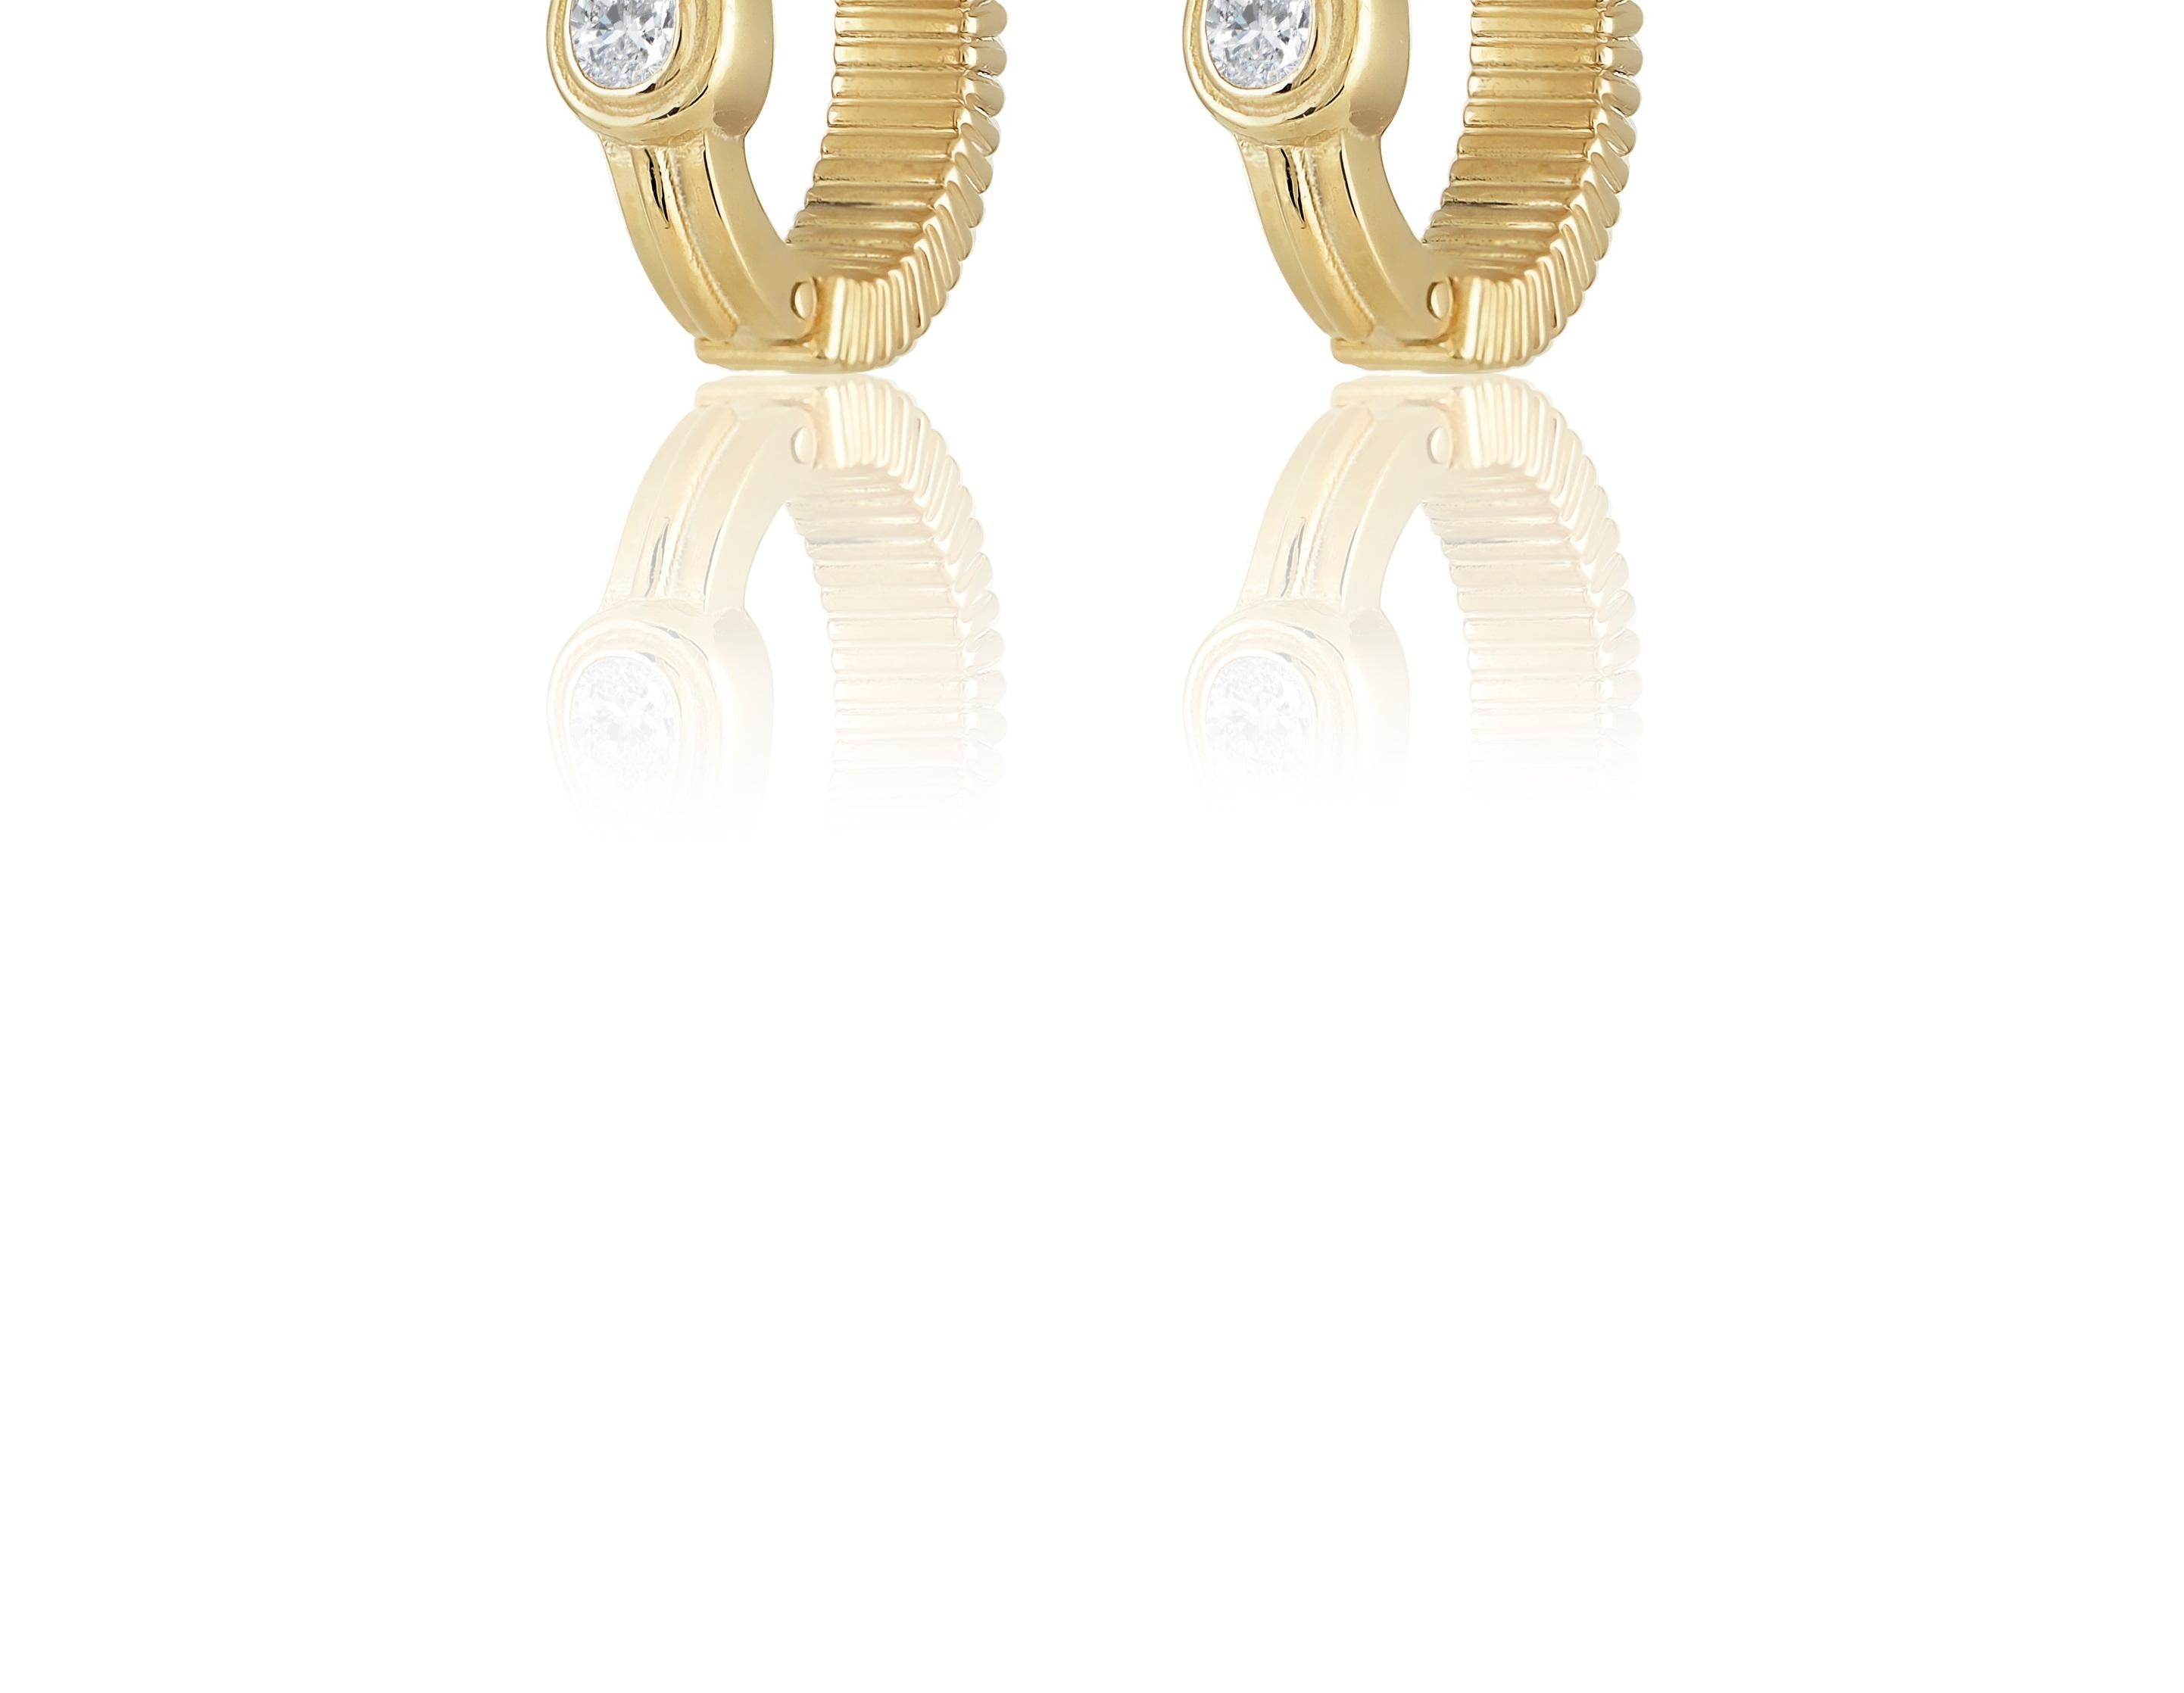 Designer: Alexia Gryllaki

Dimensions: motif L16x6mm
Weight: approximately 9.5g (pair)
Barcode: NEX4013


Gold Textures hoops in 18 karat yellow gold with pear-shape colorless diamonds approx. 0.50cts, that can be worn in two different ways, with